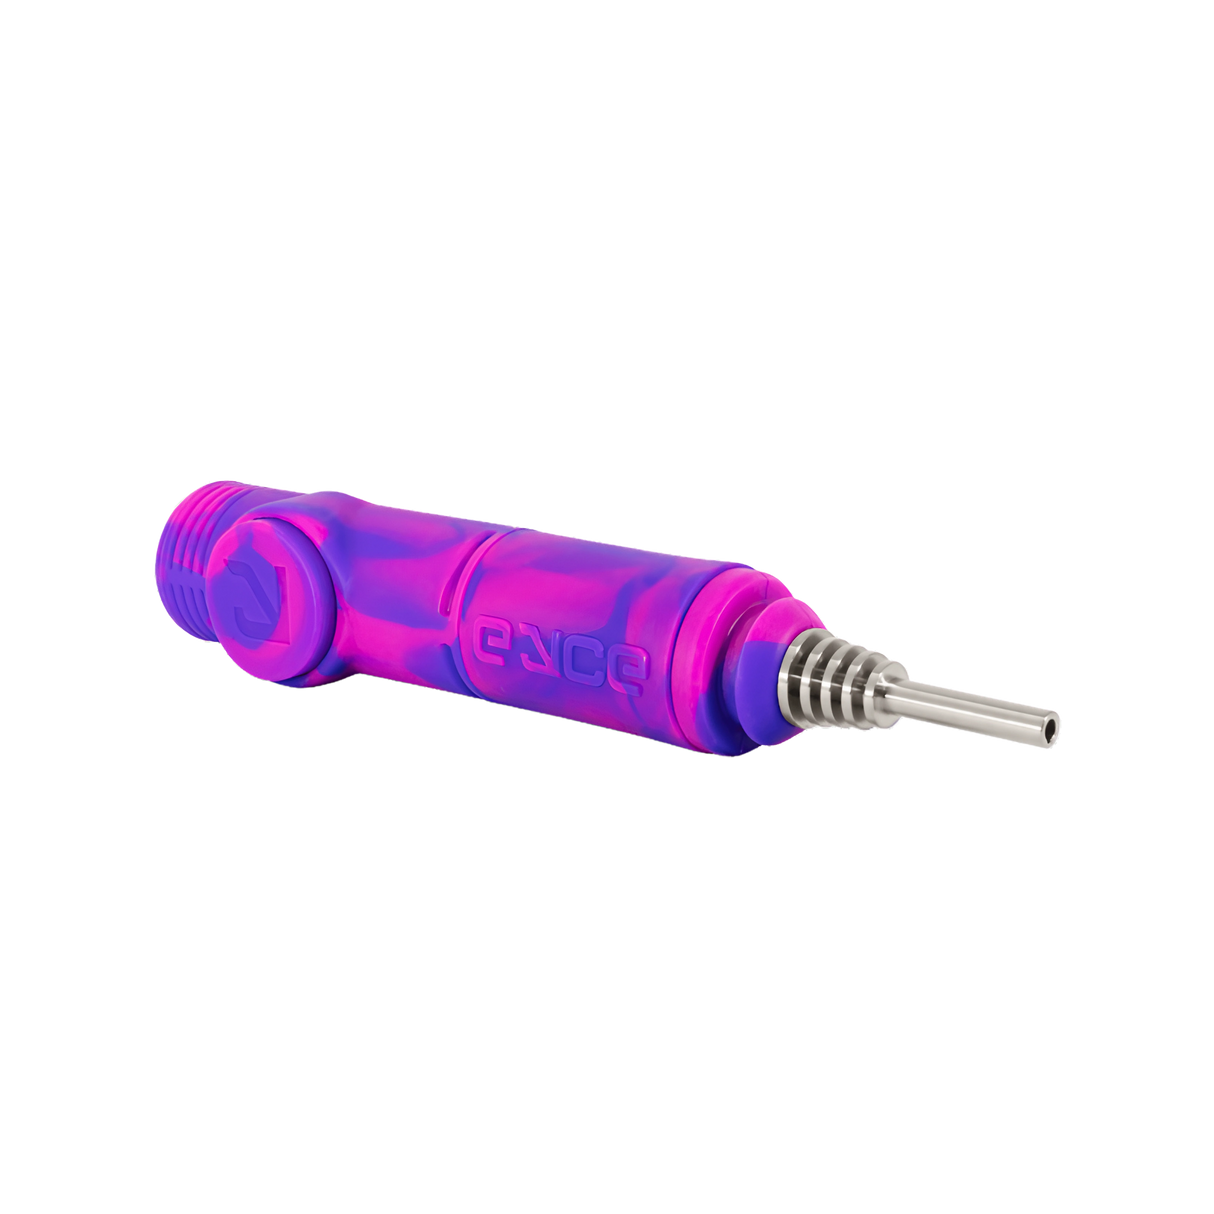 Eyce Collector in Flowerpur - Silicone Dab Straw with Titanium Tip, 6" Length